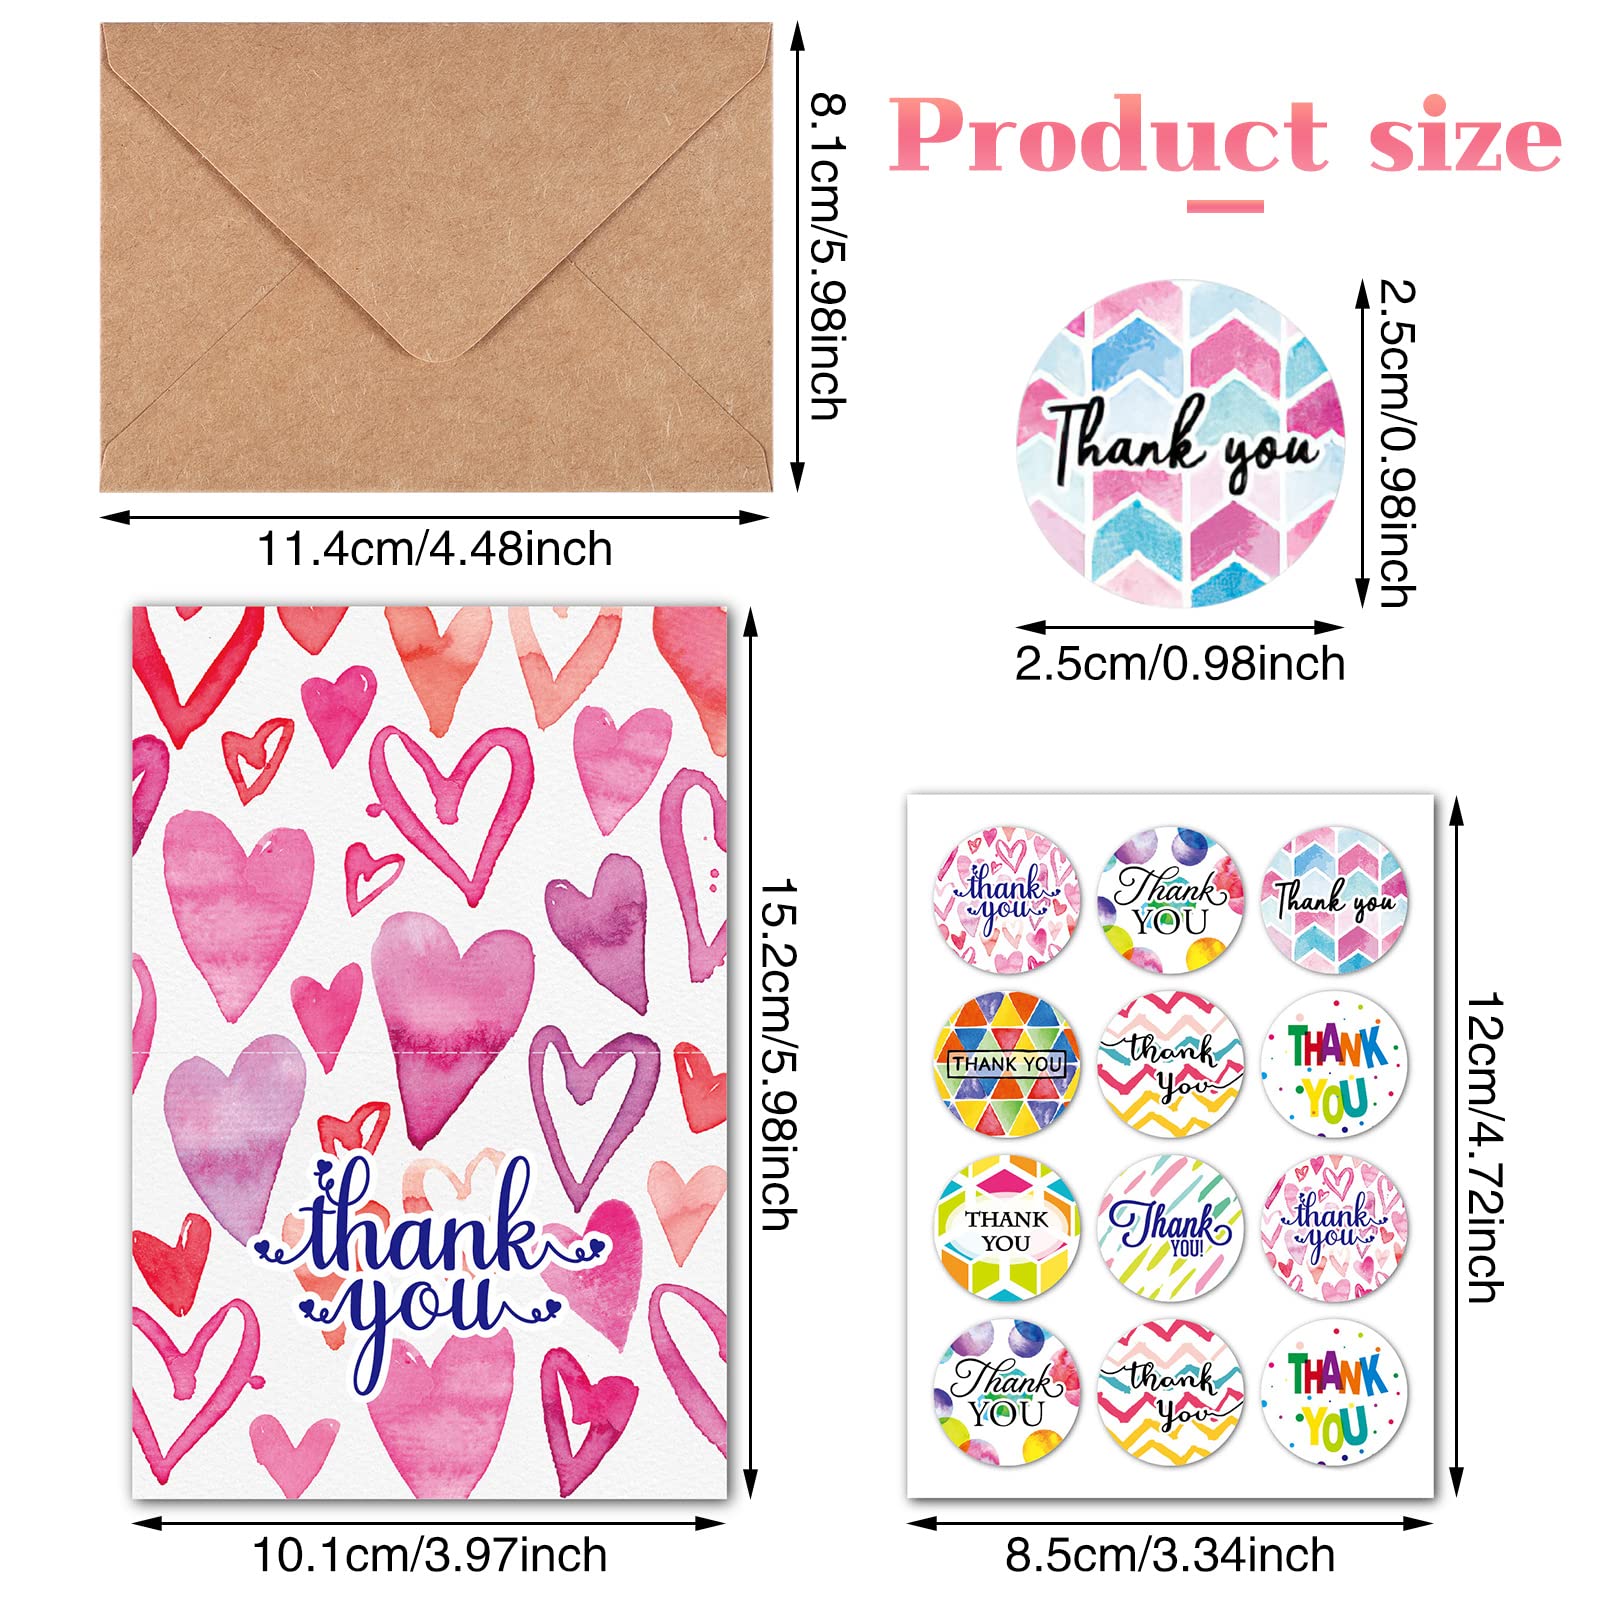 24 Pack Thank You Cards, Thank You Cards Multipack with envelopes Greeting Cards Rainbow Thank You Greeting Cards & Stickers for Wedding Graduation Teacher Birthday Baby Shower